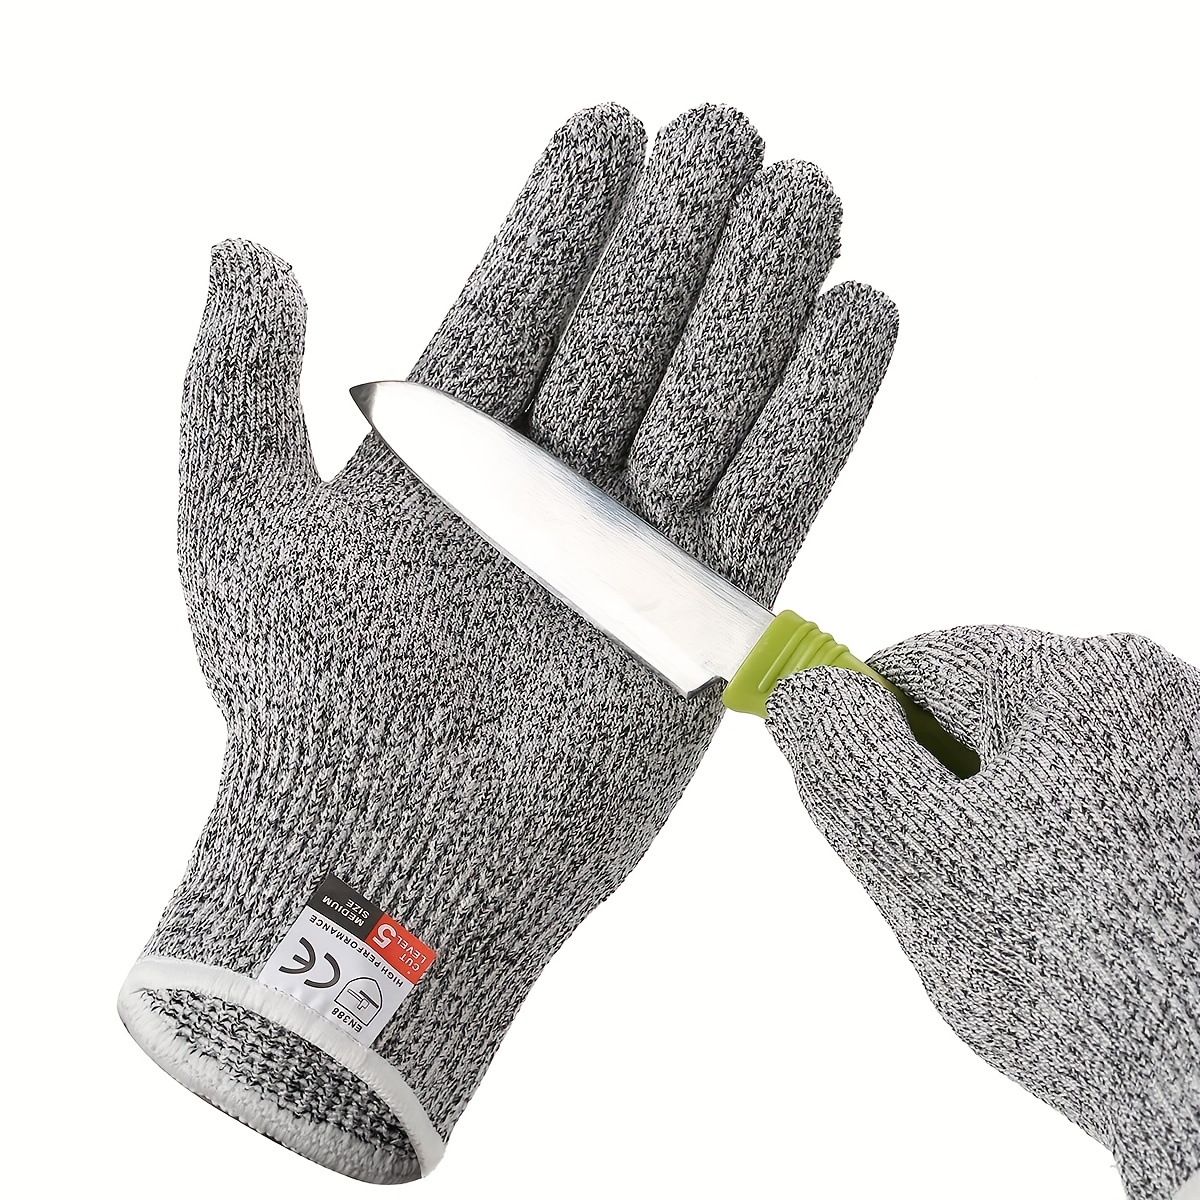 Cut Resistant Gloves with Level 5 High Performance Protection, Kitchen Work  Gloves, Mandolin, Fish Fillet, Meat Cutting and Carving 